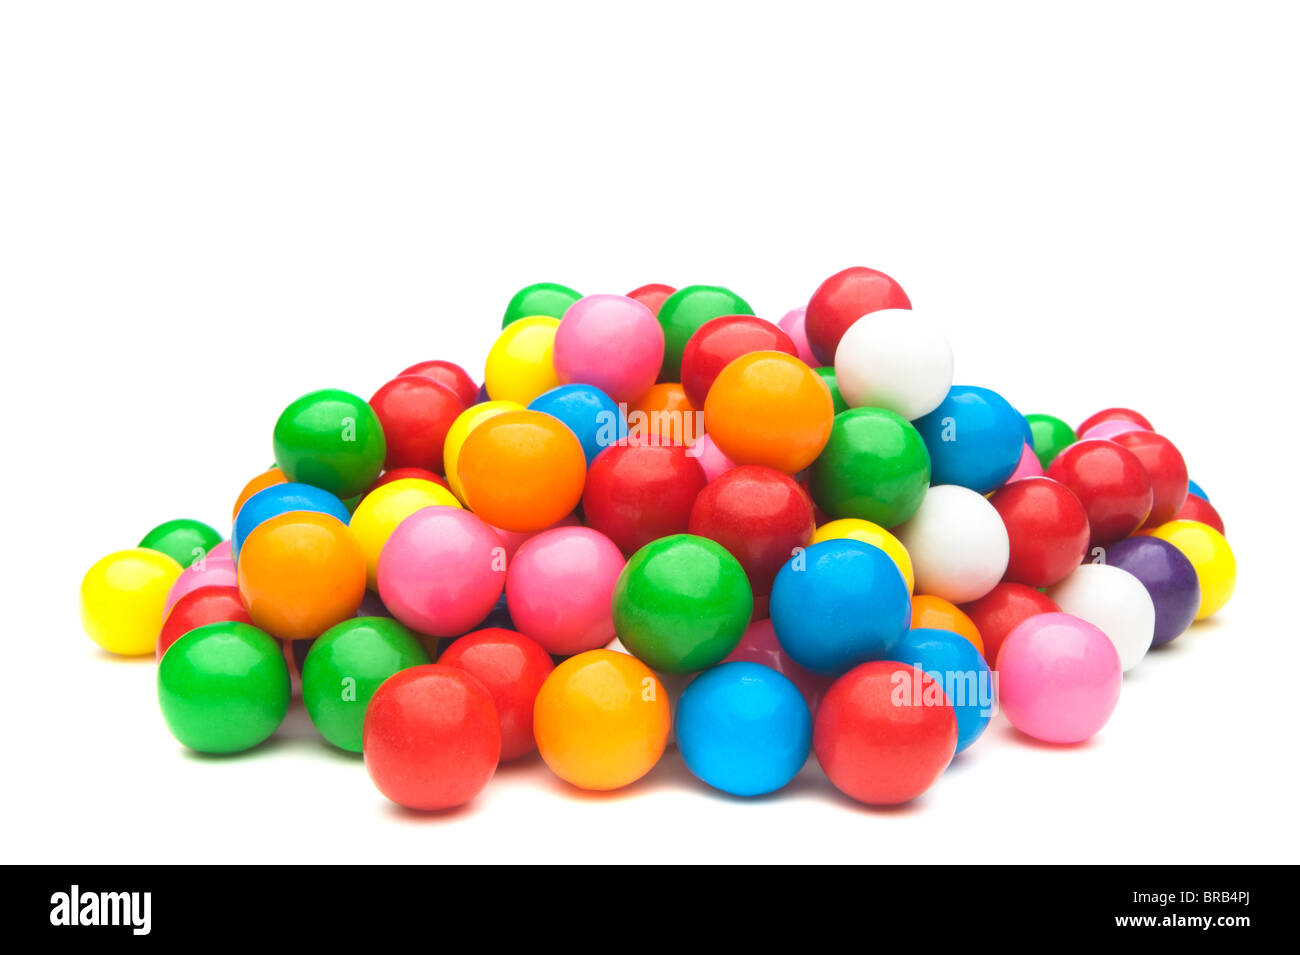 A pile of colorful gumballs on a white background. Stock Photo